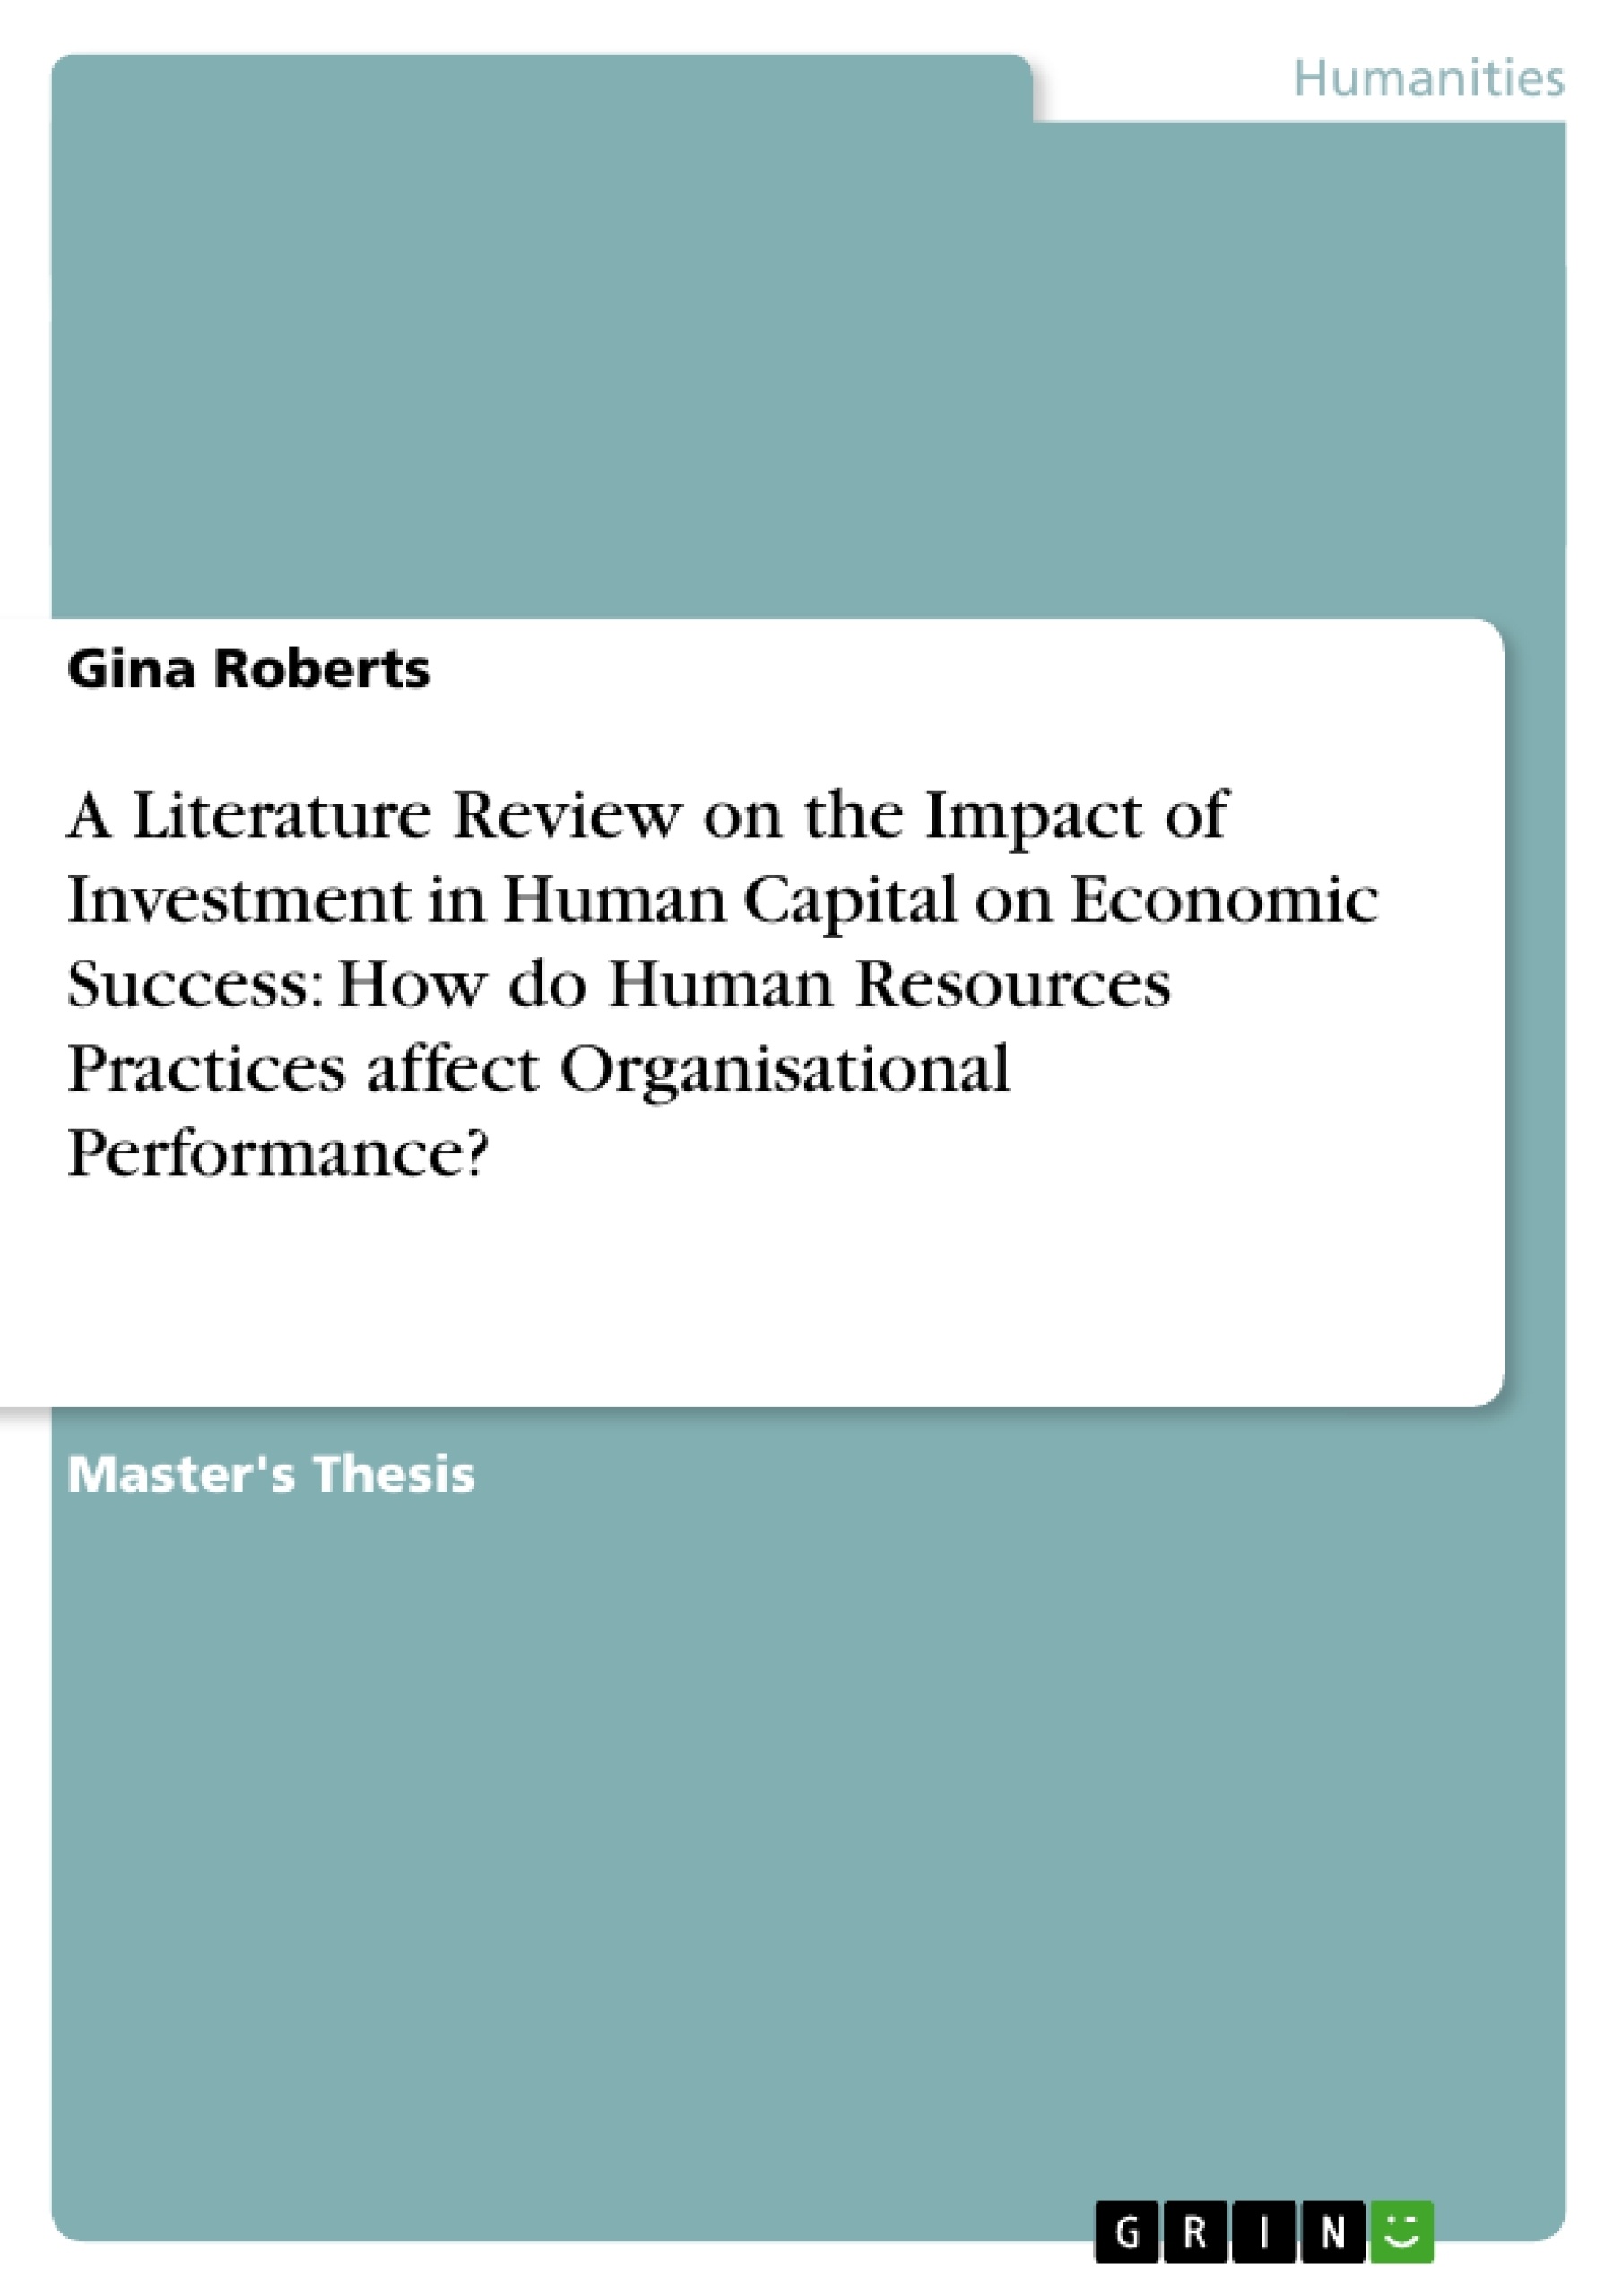 Title: A Literature Review on the Impact of Investment in Human Capital on Economic Success: How do Human Resources Practices affect Organisational Performance?